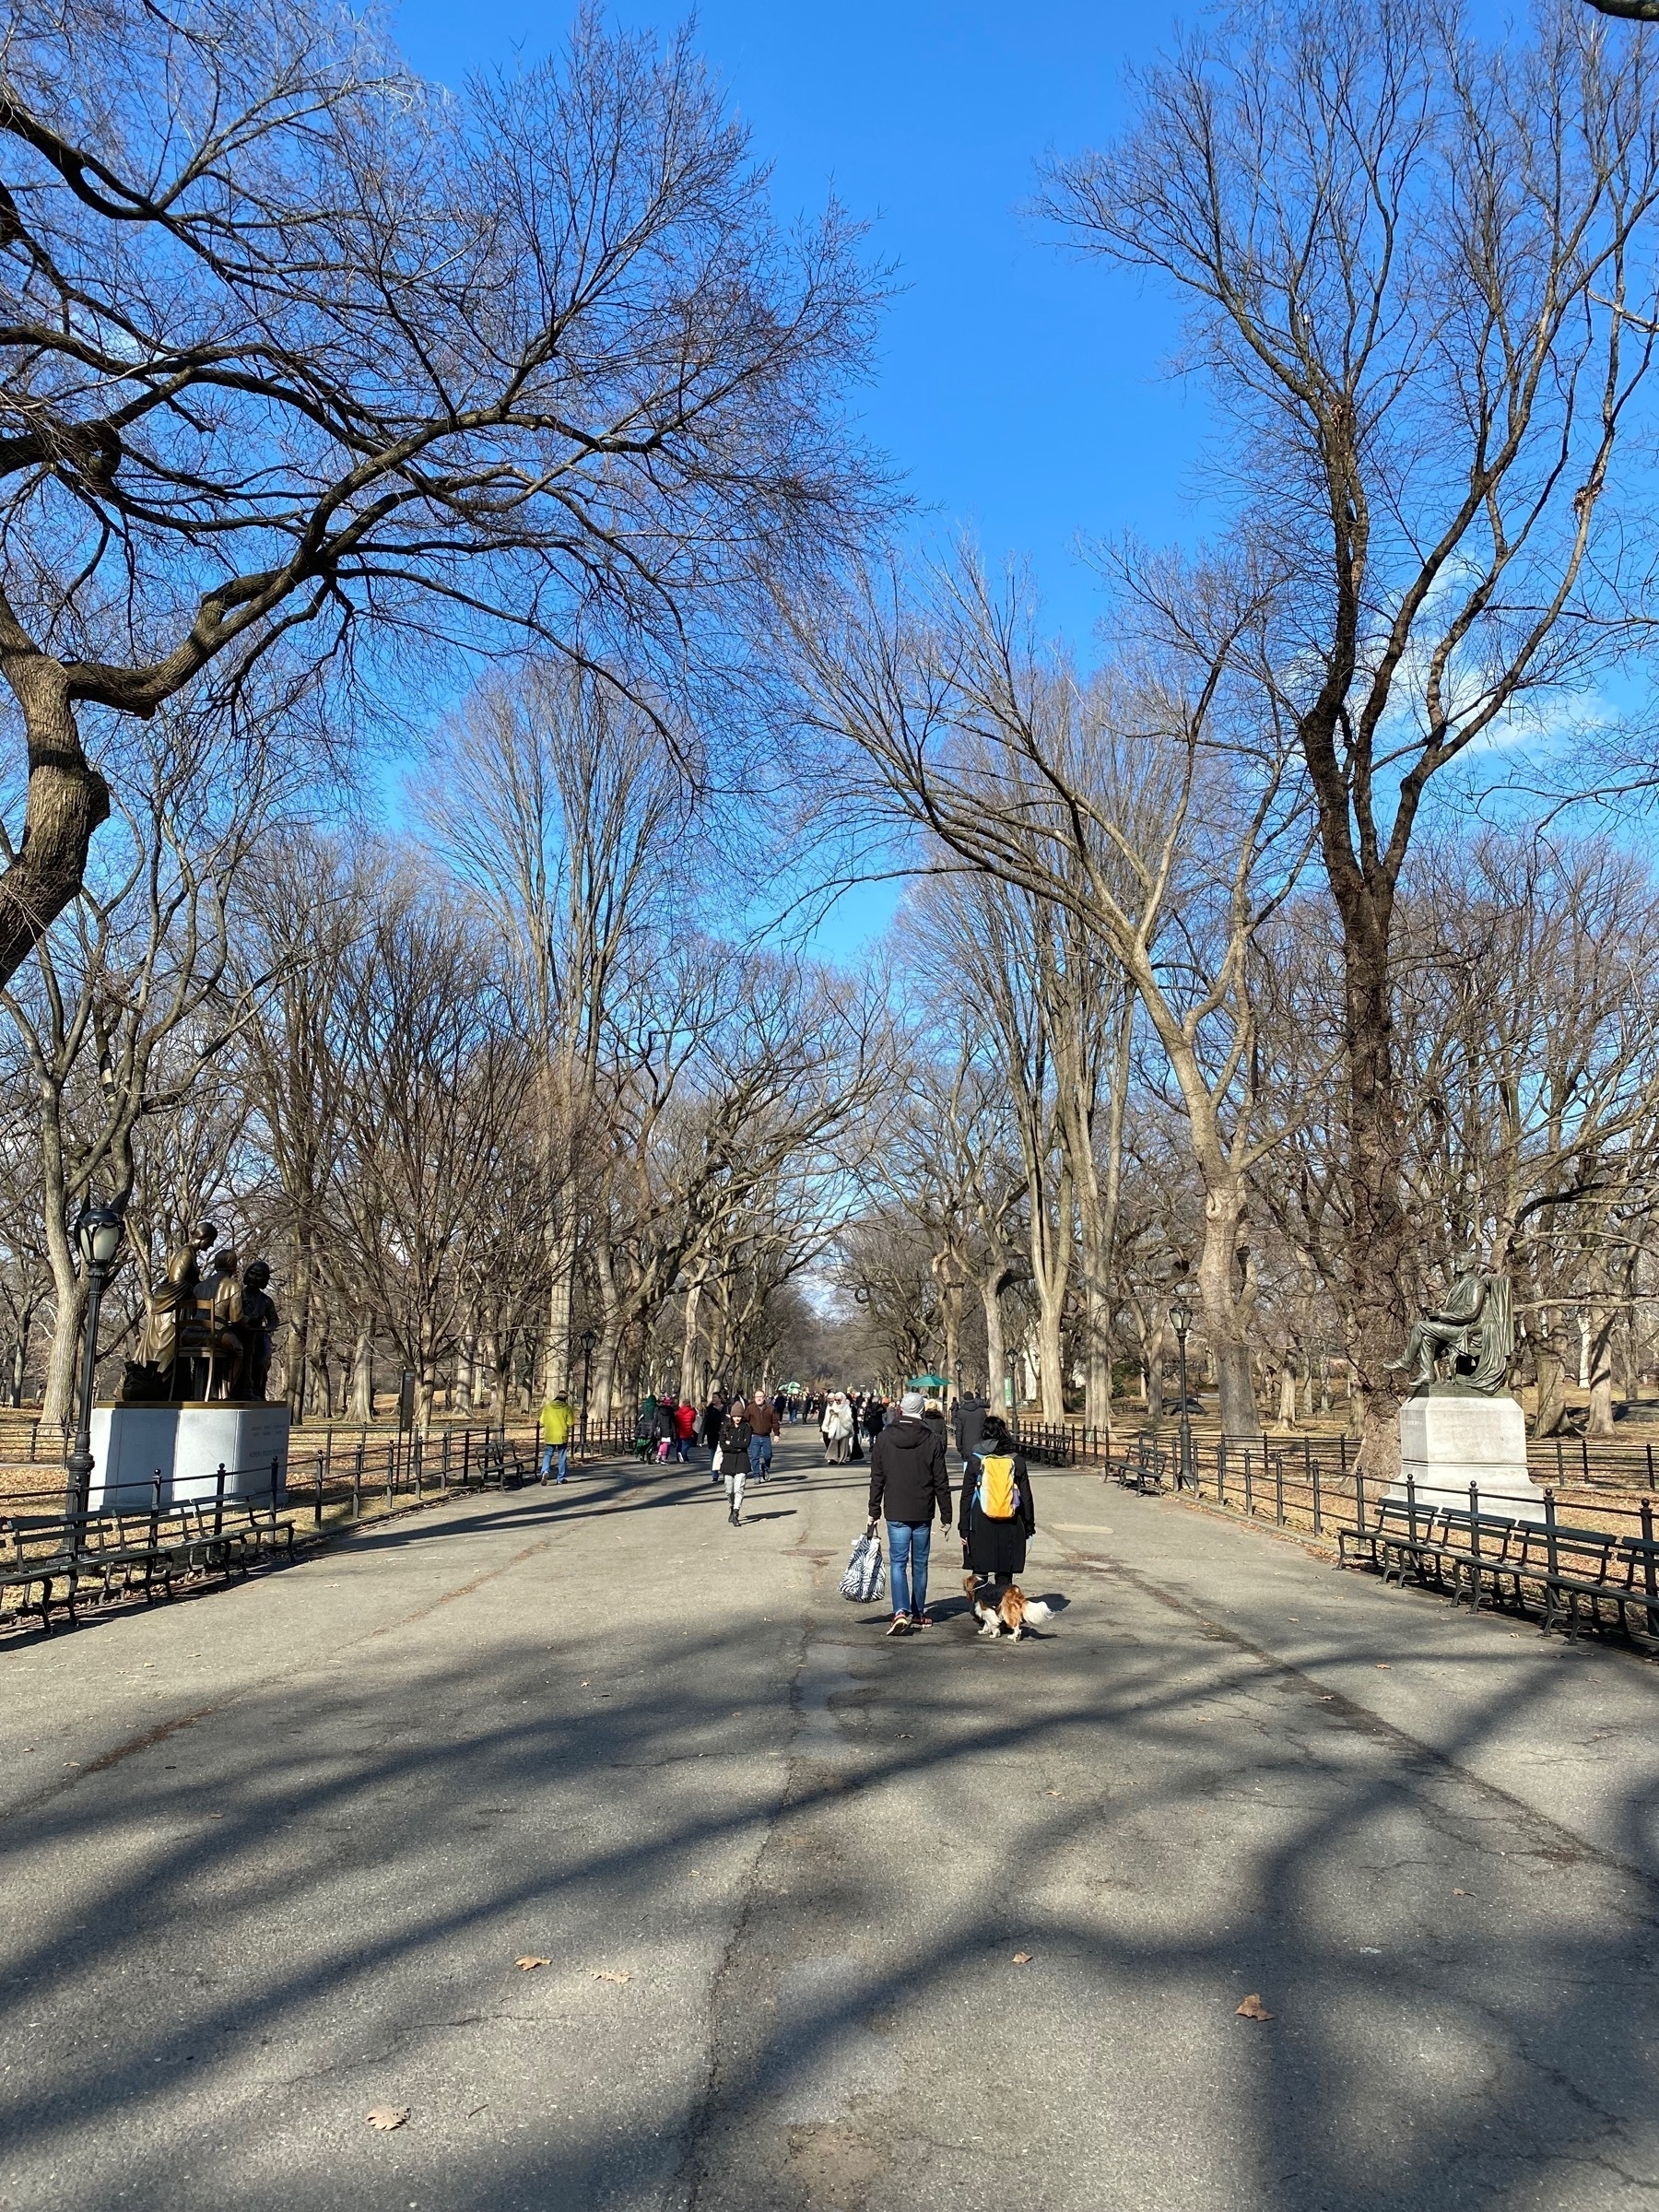 A path in central park with bare trees on both sides.